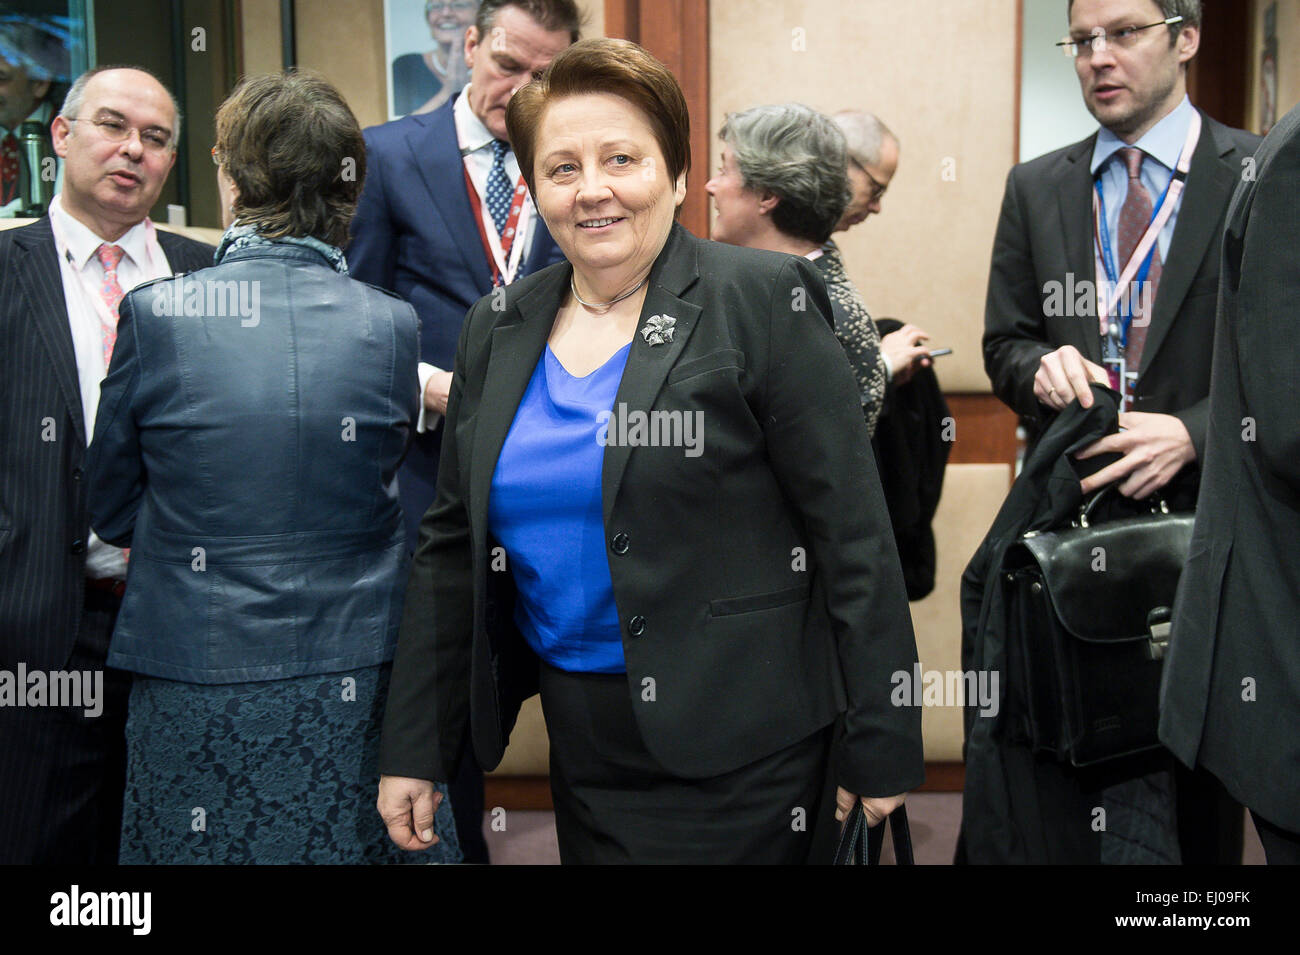 Latvia Prime Minister Laimdota Straujuma at the start of a Tripartite Social Summit ahead of the EU Summit in Brussels, Belgium on 19.03.2015 by Wiktor Dabkowski Stock Photo